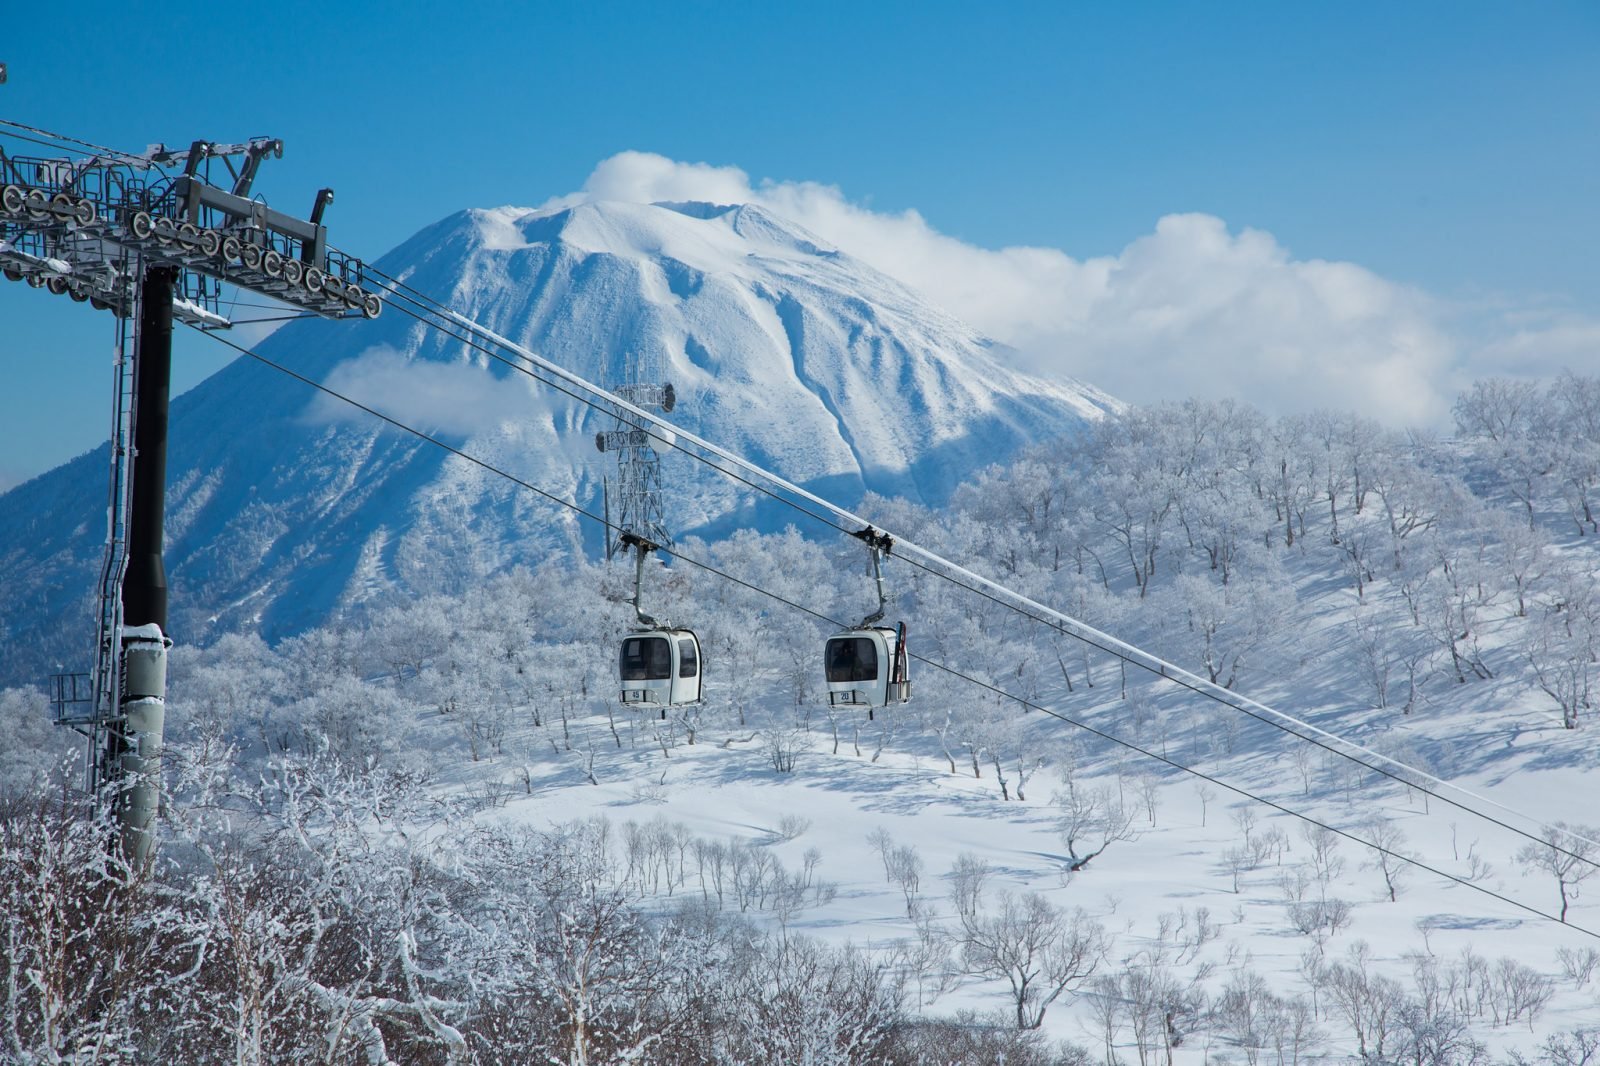 Get Ready for the Ultimate Spring Ski Experience in Nisekoの画像